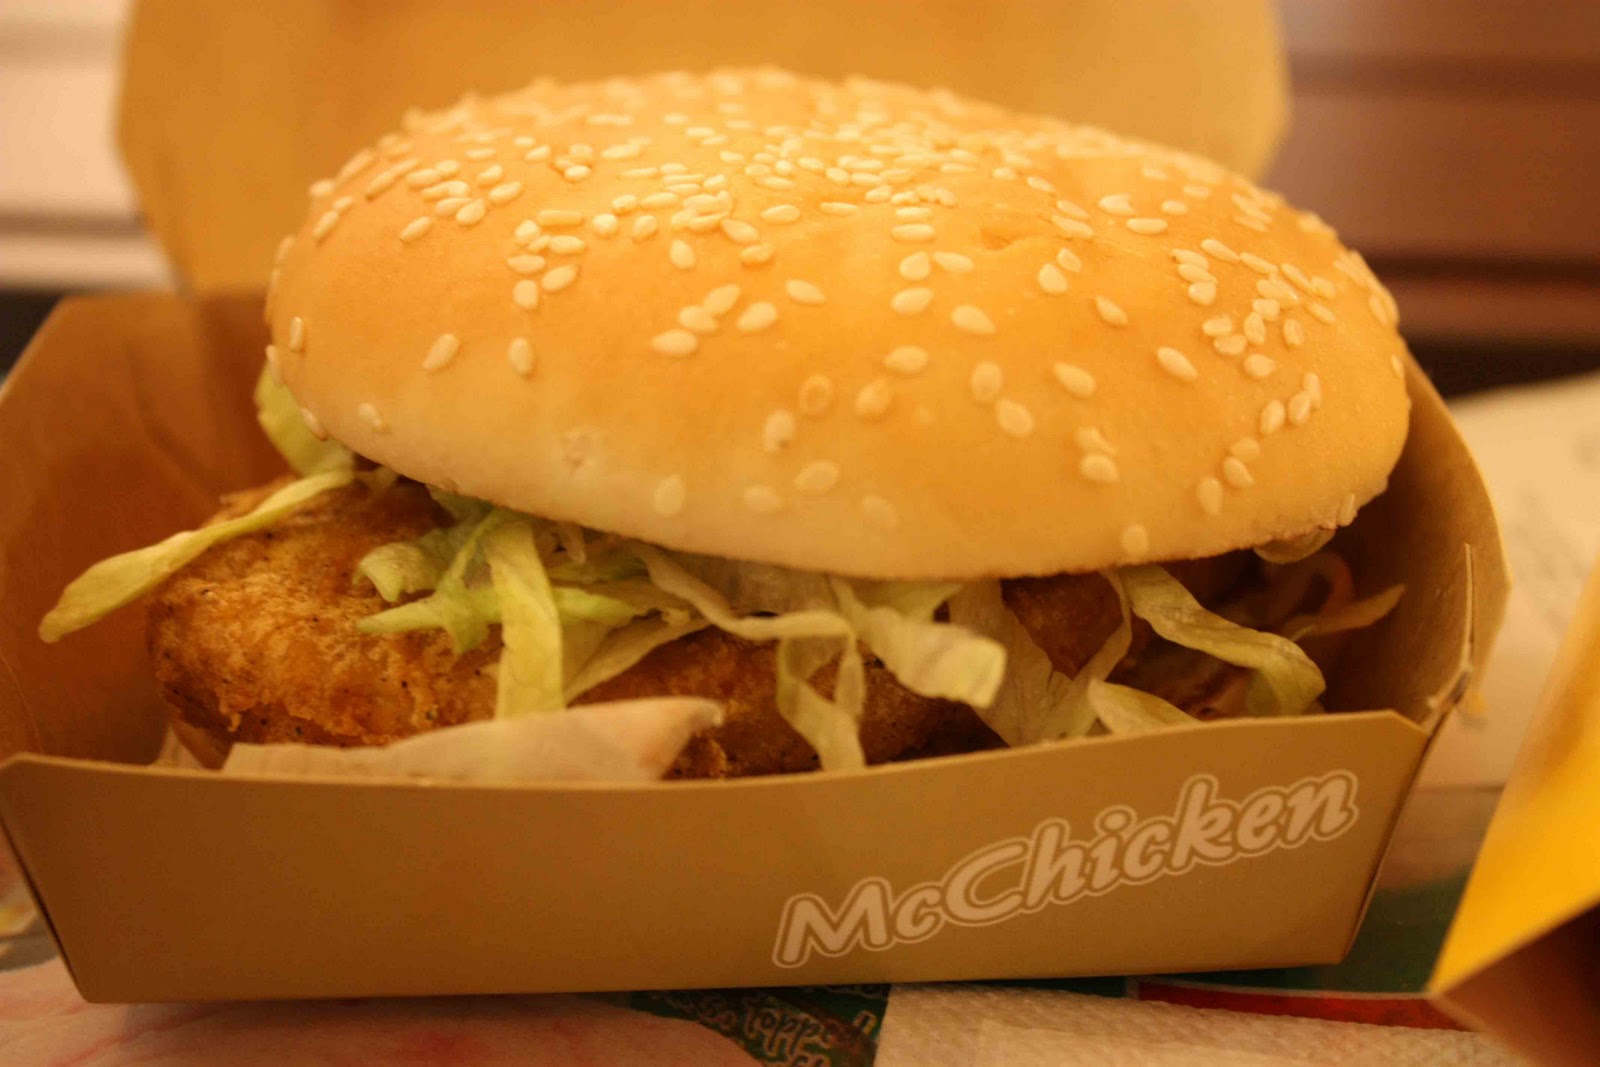 I like ordering the McChicken Sandwich because I feel its the healthiest fo...